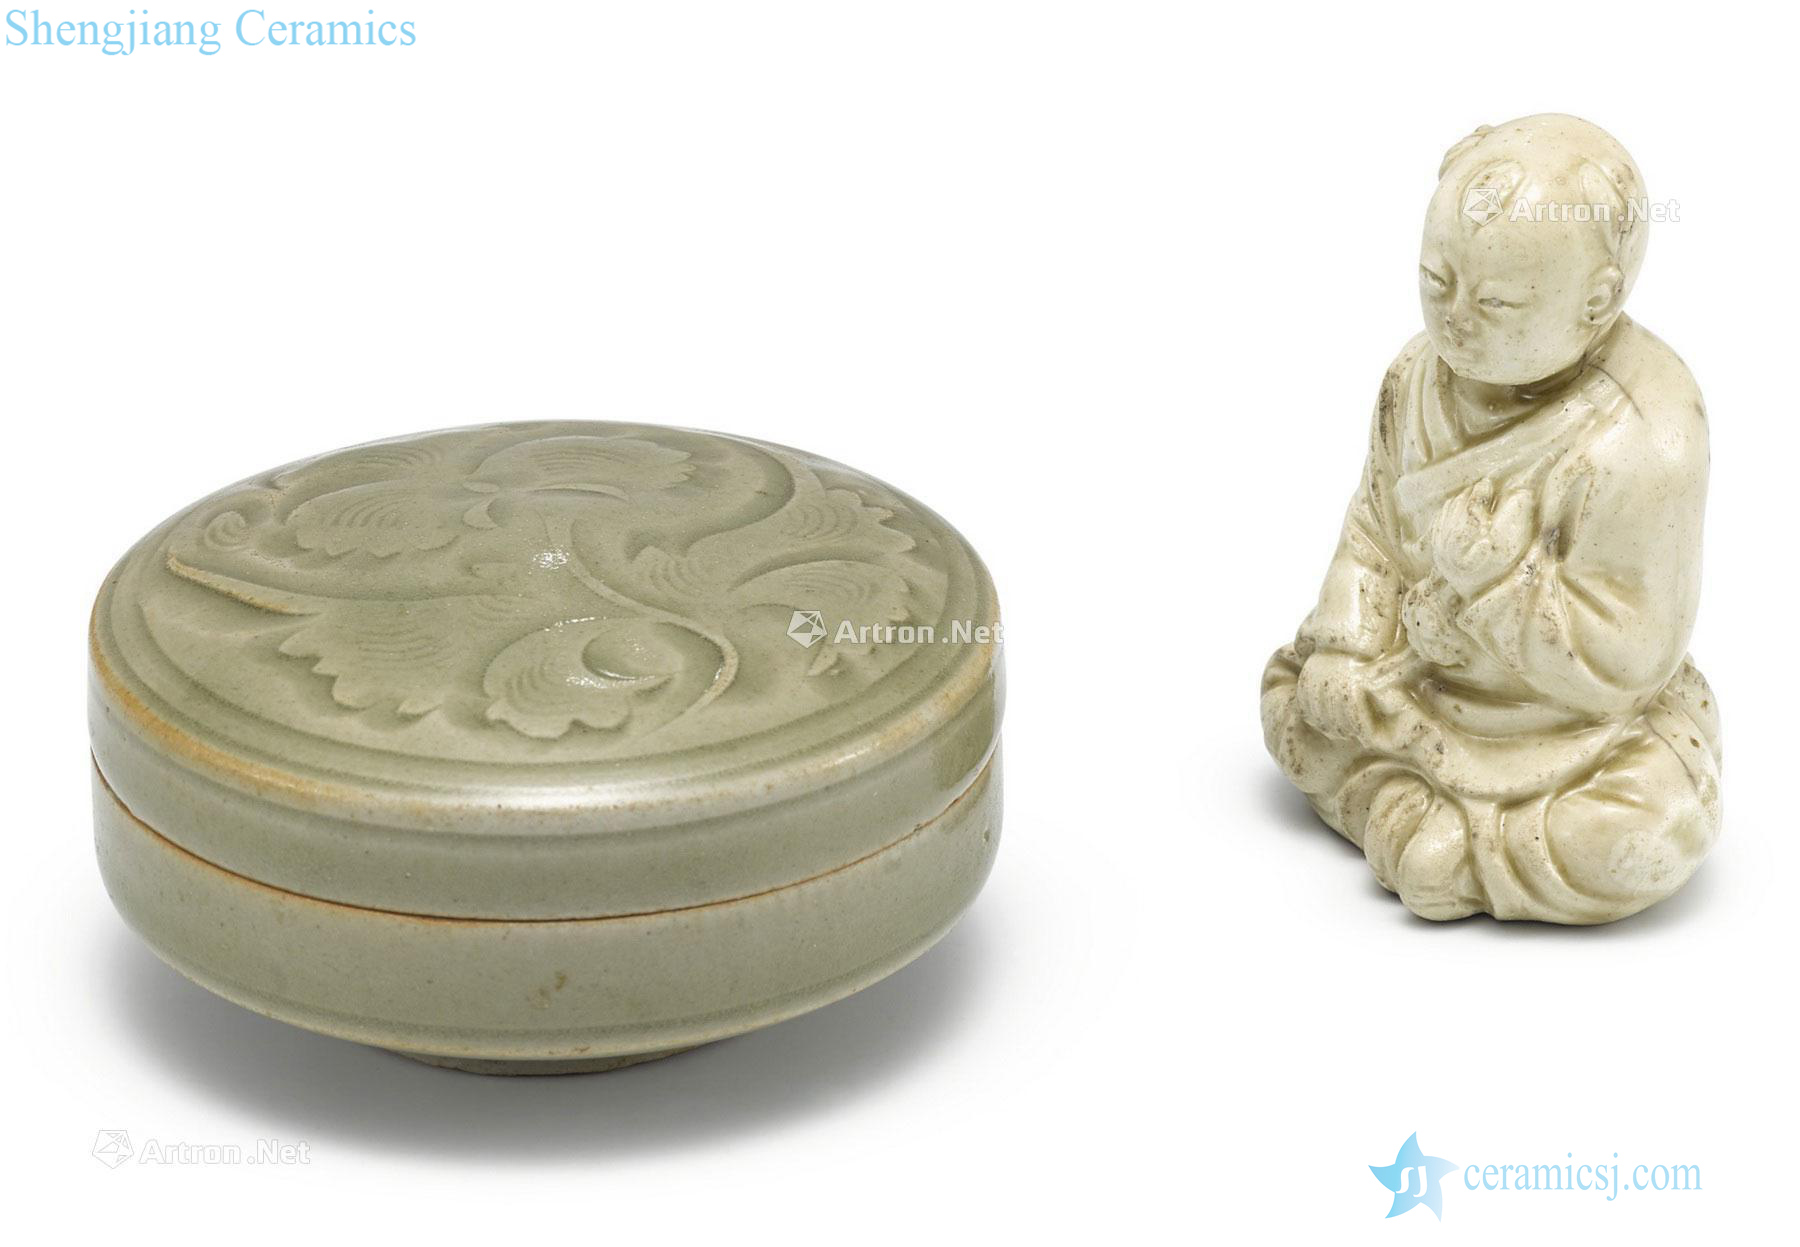 Northern song dynasty to gold Yao state green glaze flower grain cover box and yuan White glazed lad